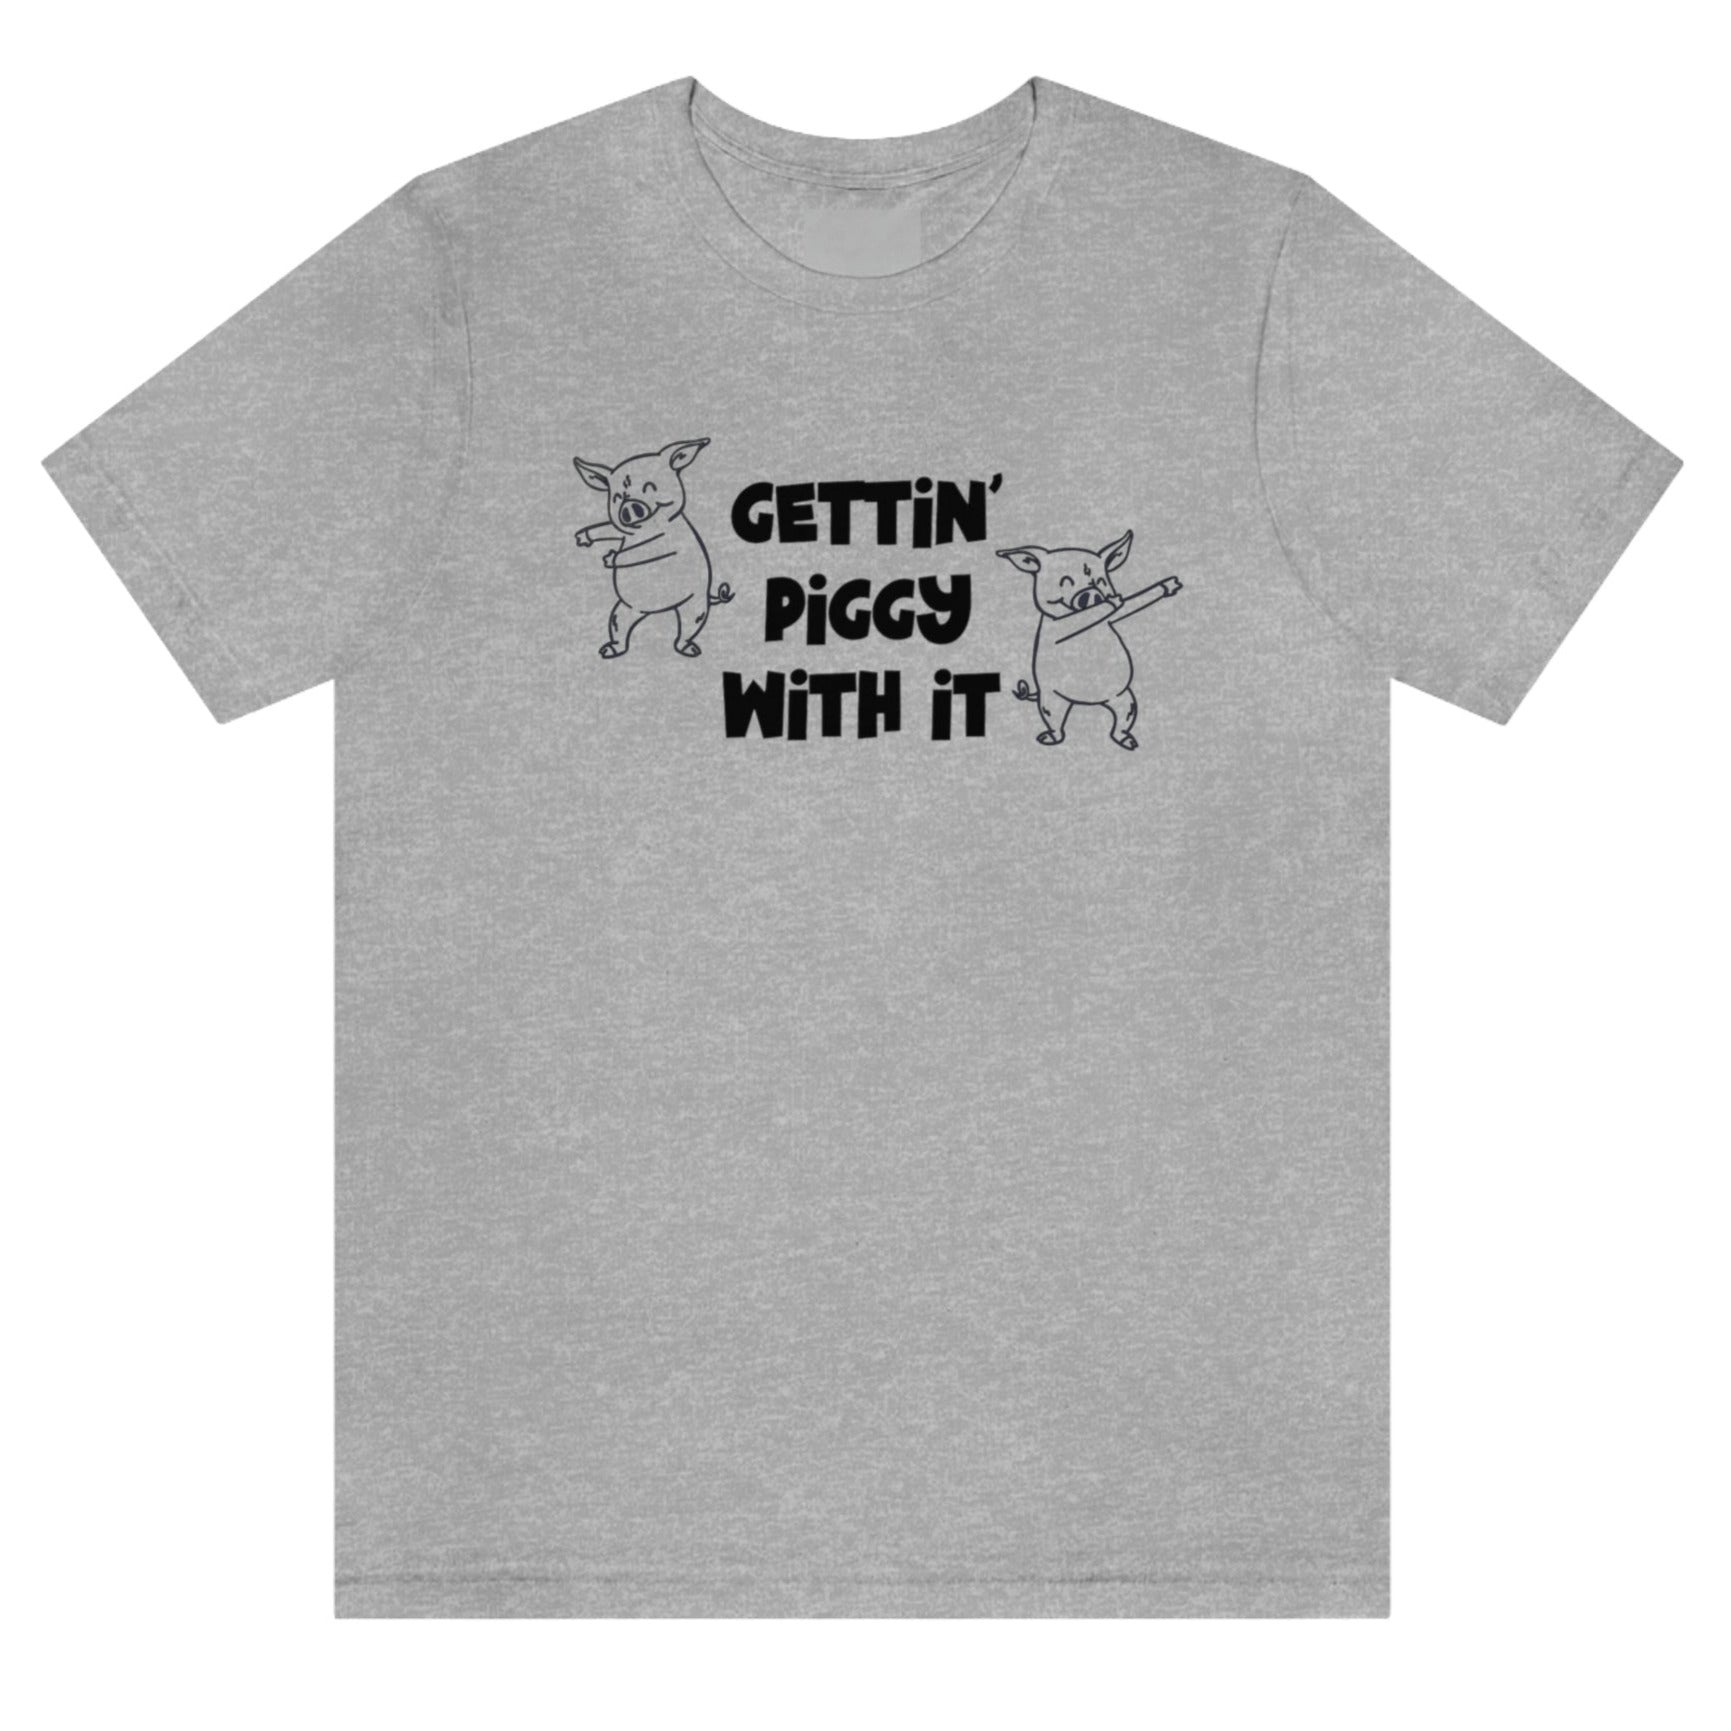 gettin-piggy-with-it-athletic-heather-grey-t-shirt-funny-dancing-pigs